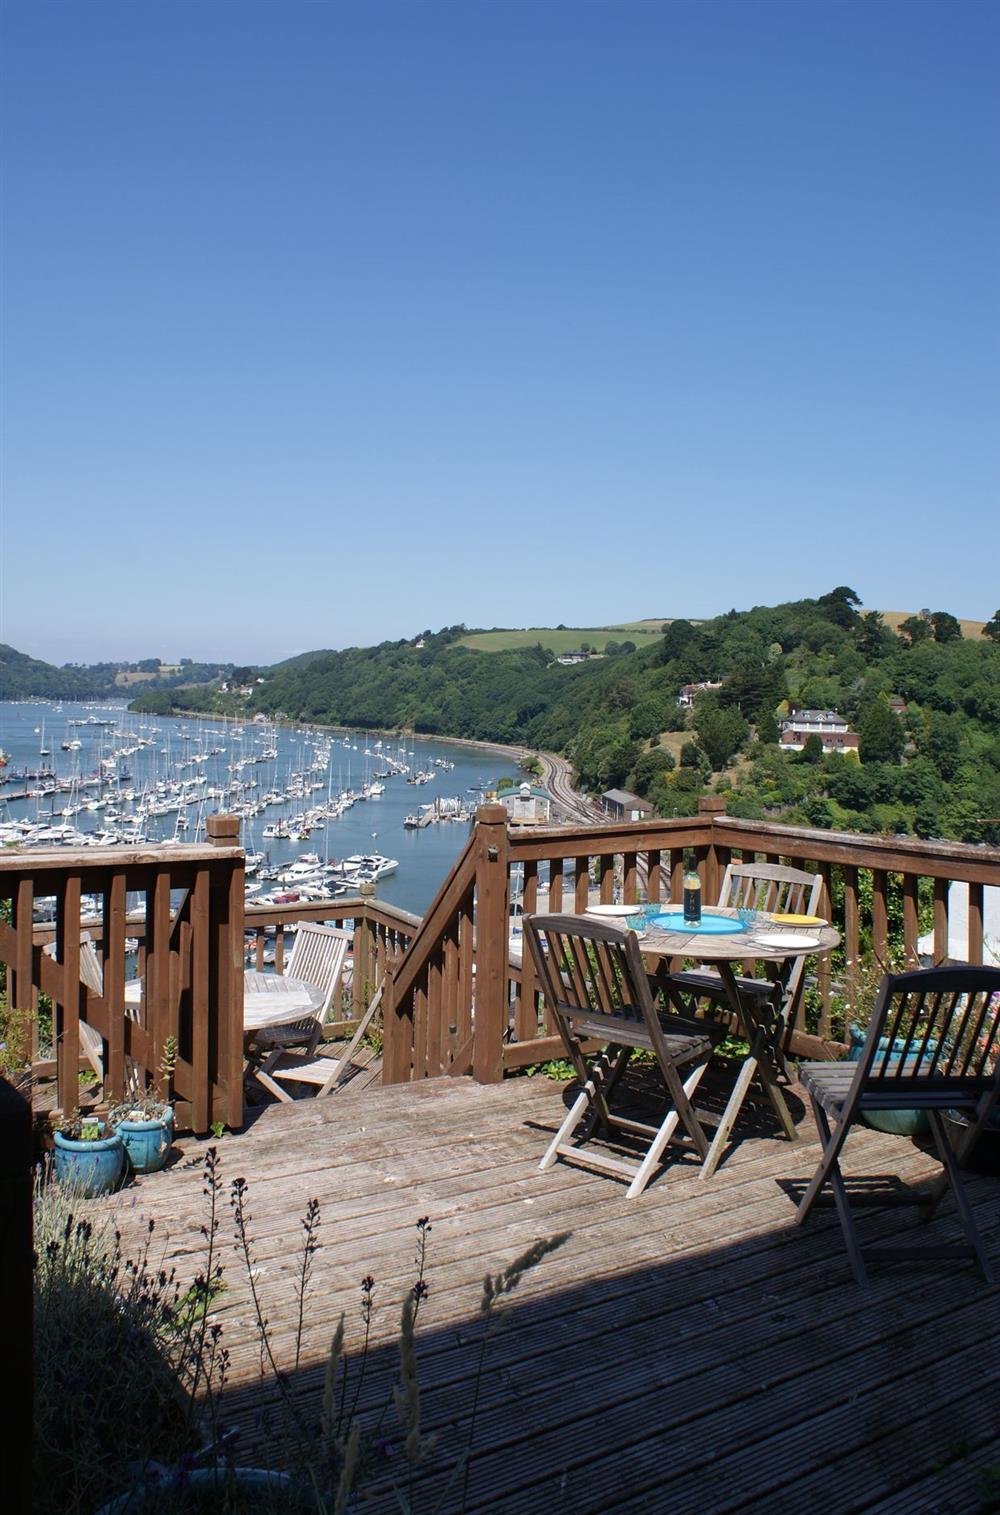 Views from the decked area at The Boathouse, Kingswear, Torbay and the Red Cliffs